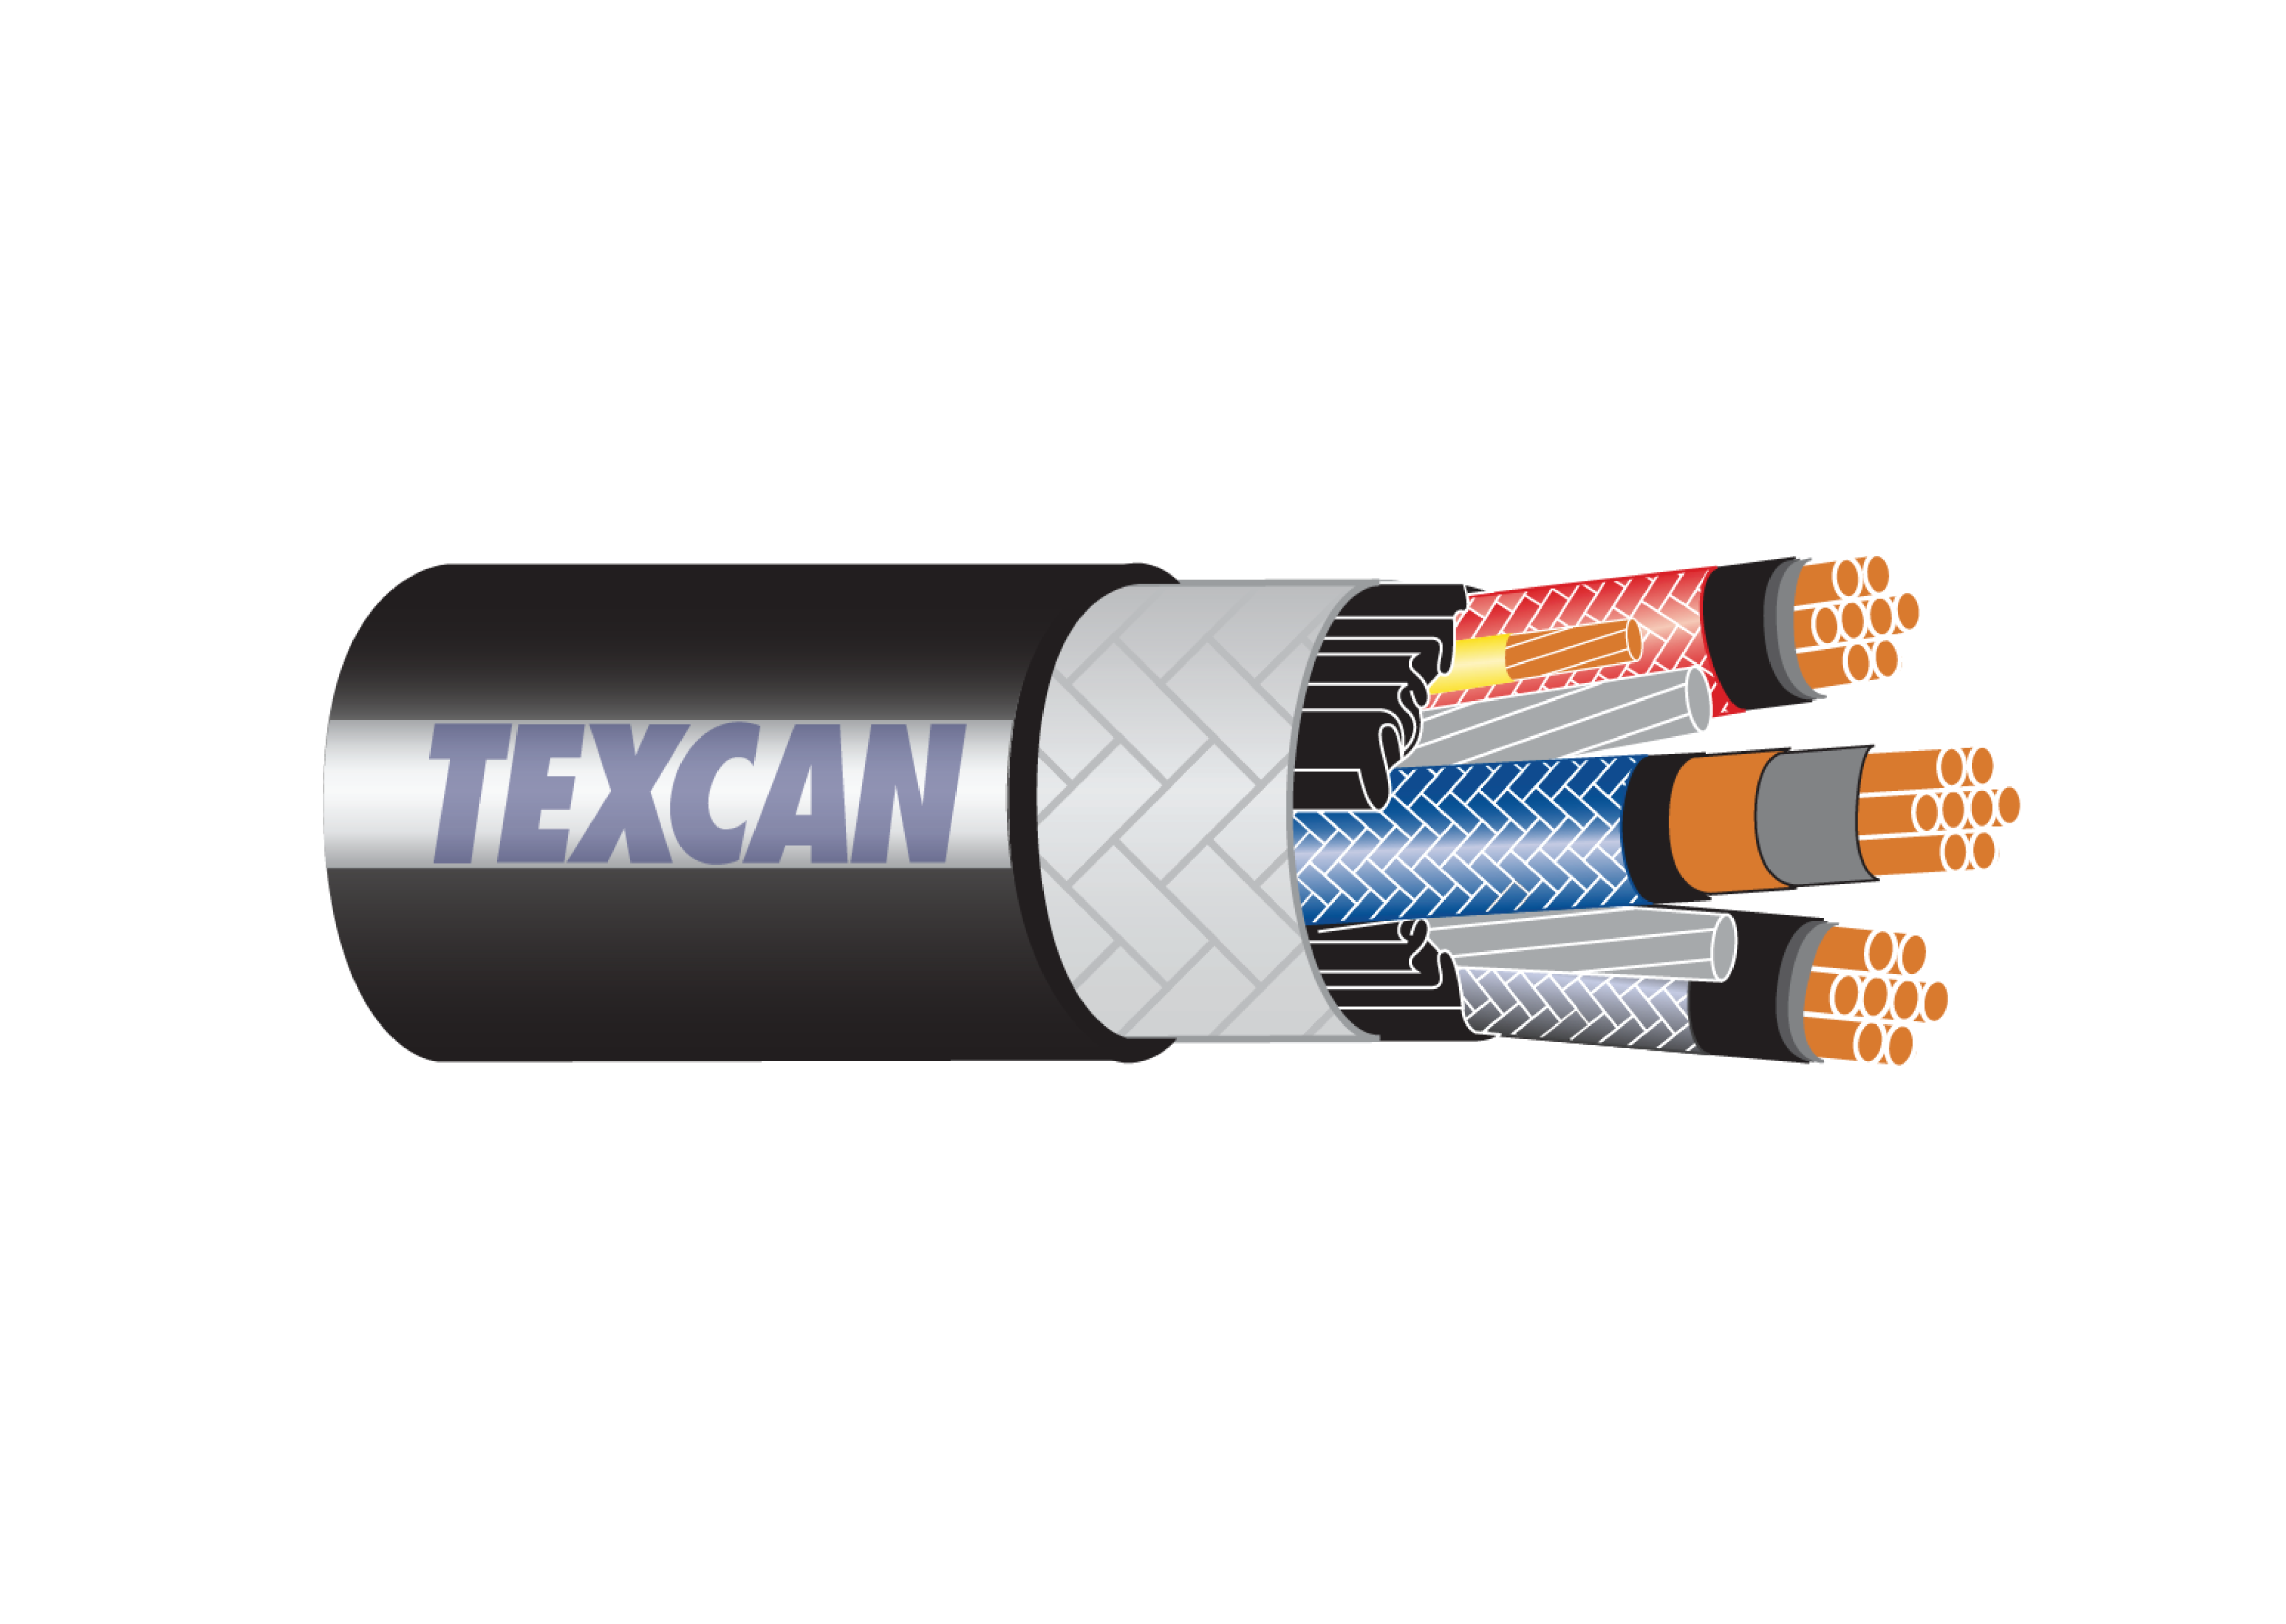 Texcan - Landing Pages - Prysmian Group - Mining Cable.png